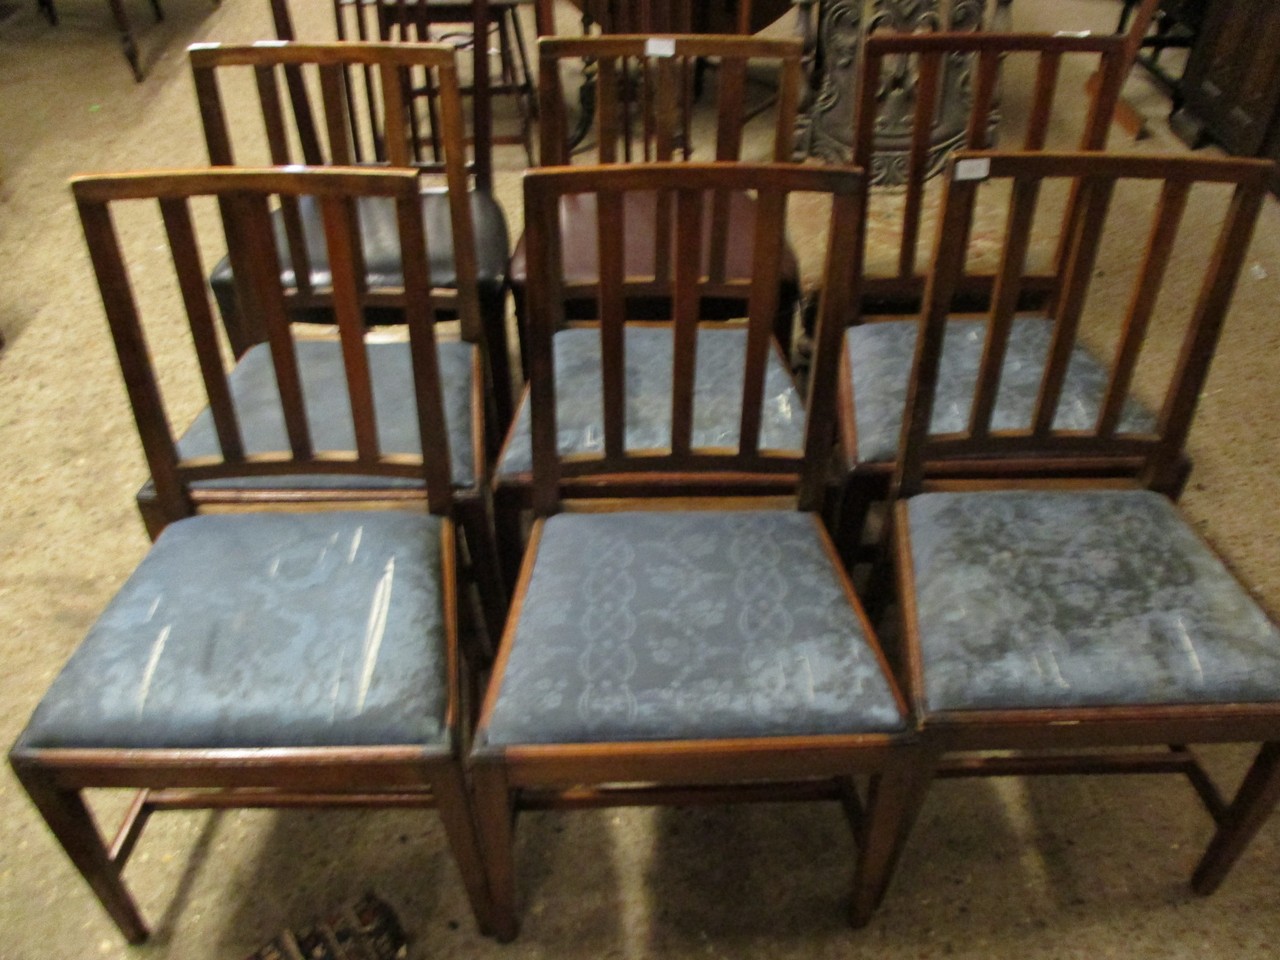 MAHOGANY FRAMED SET OF SIX DINING CHAIRS WITH SPLAT BACK AND BLUE UPHOLSTERED DROP IN SEATS (6)